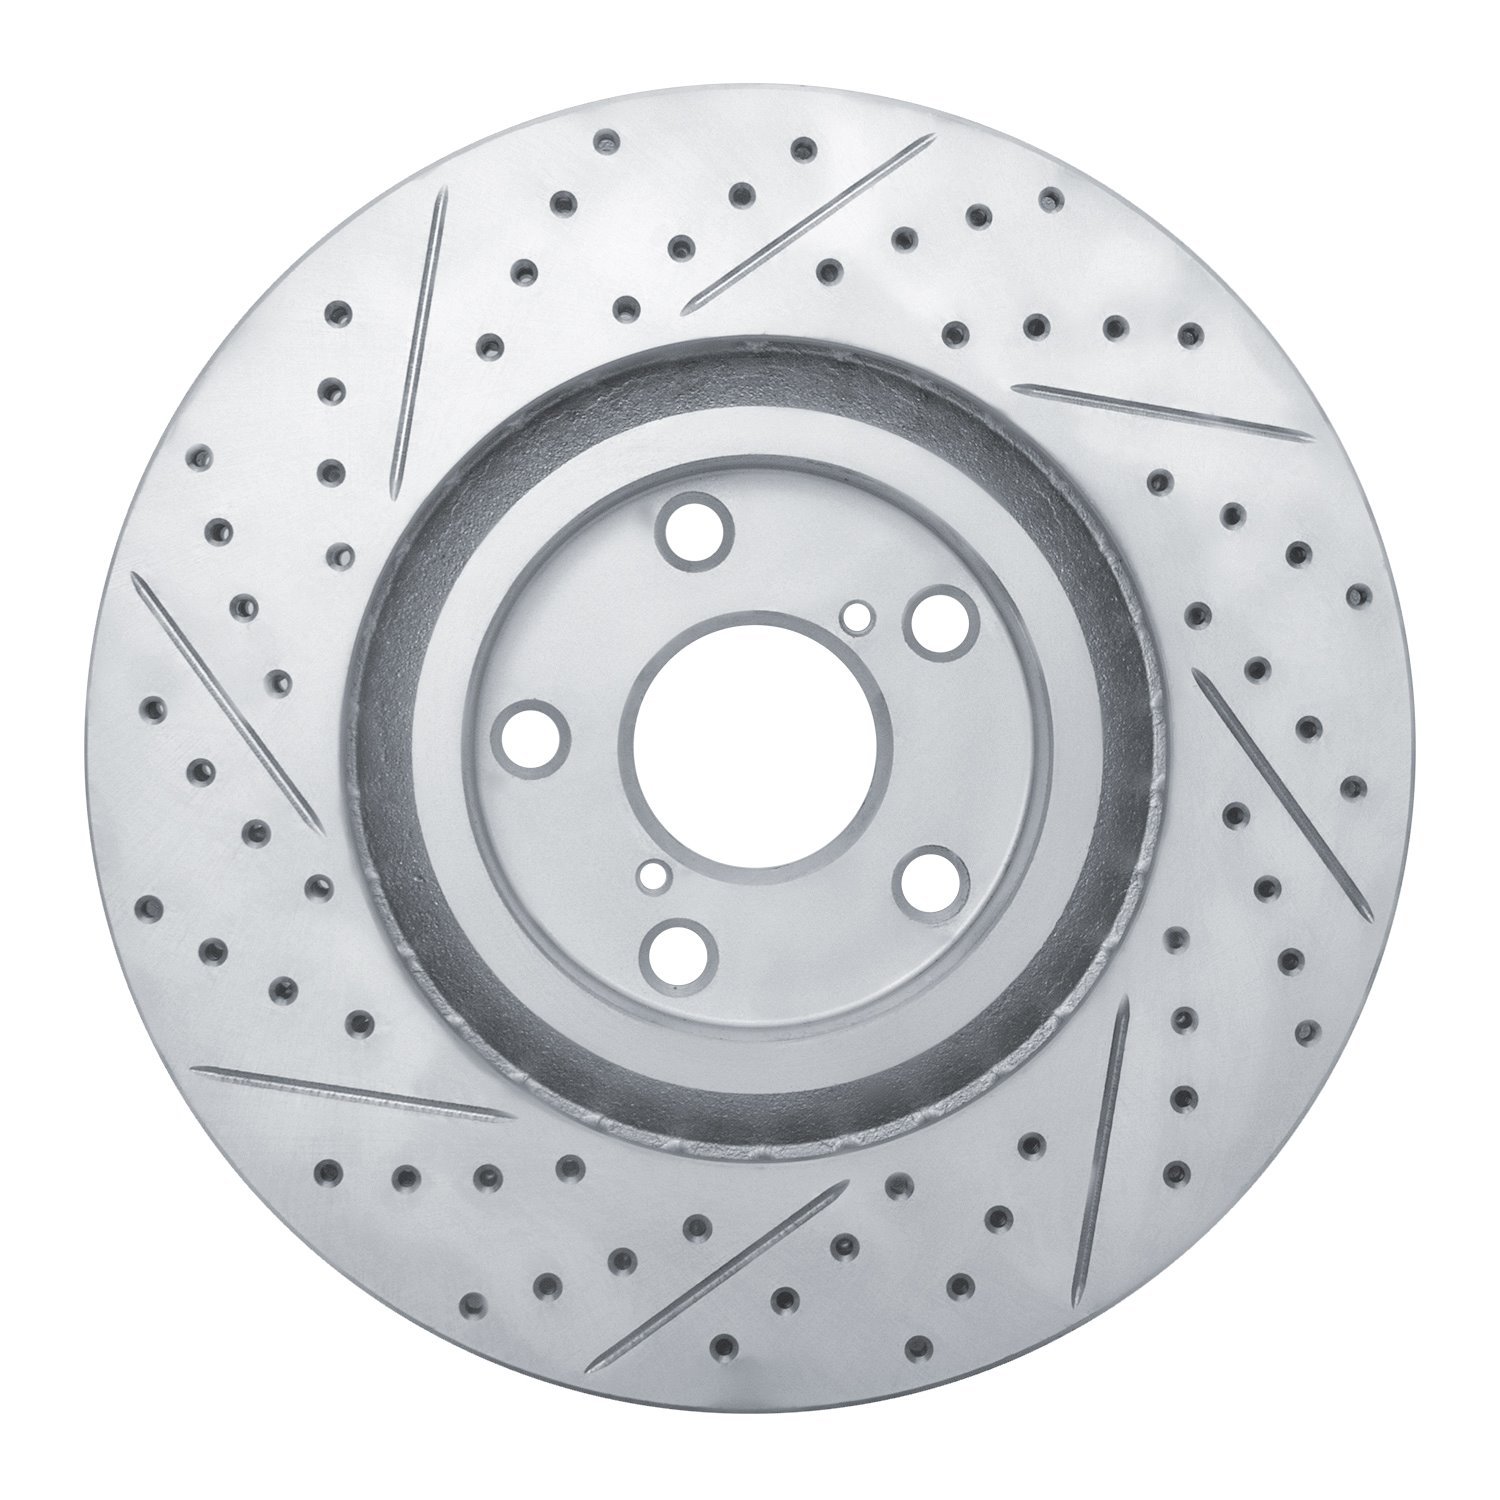 830-76062D Geoperformance Drilled/Slotted Brake Rotor, 1993-1998 Lexus/Toyota/Scion, Position: Left Front